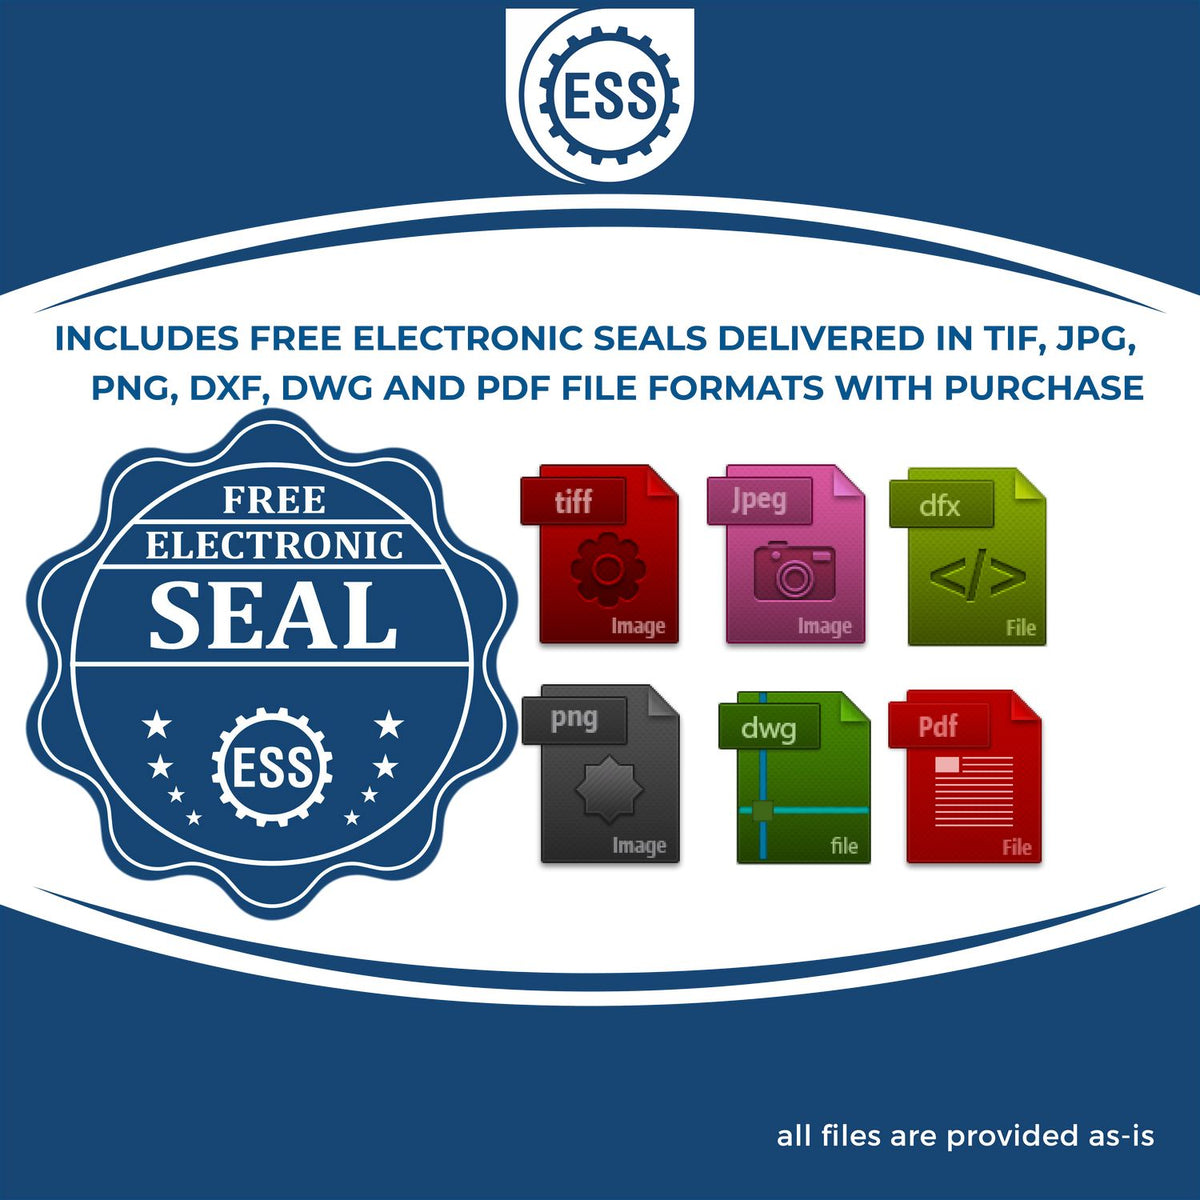 An infographic for the free electronic seal for the Heavy Duty Cast Iron Oklahoma Engineer Seal Embosser illustrating the different file type icons such as DXF, DWG, TIF, JPG and PNG.